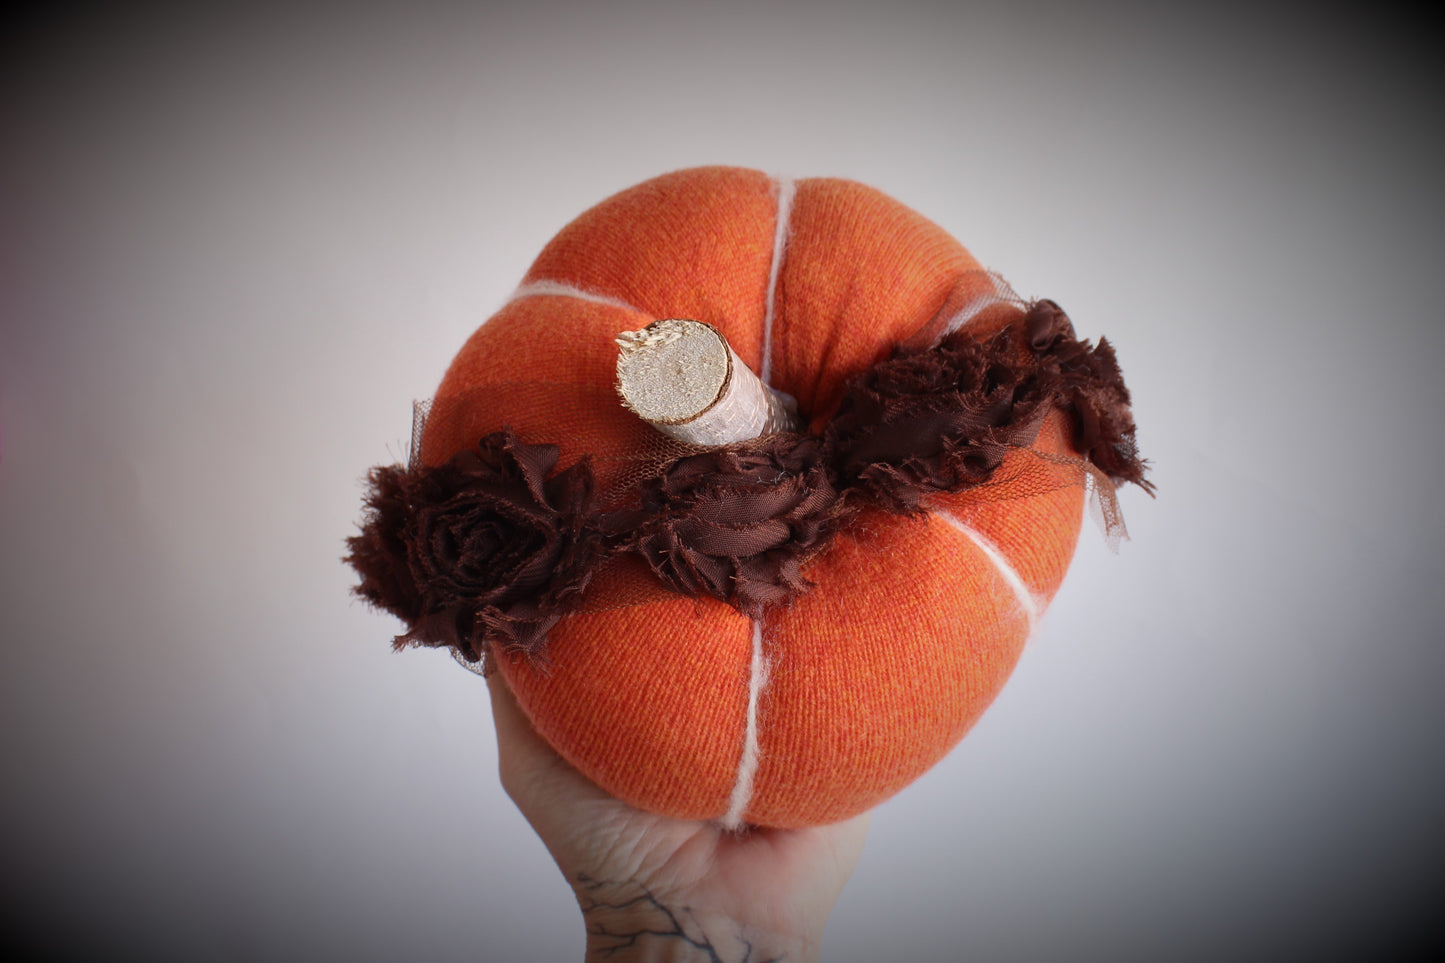 Jack O Lantern Knit Pumpkin Pillow Pouf With Tattered Rose Trim and Wooden Stem